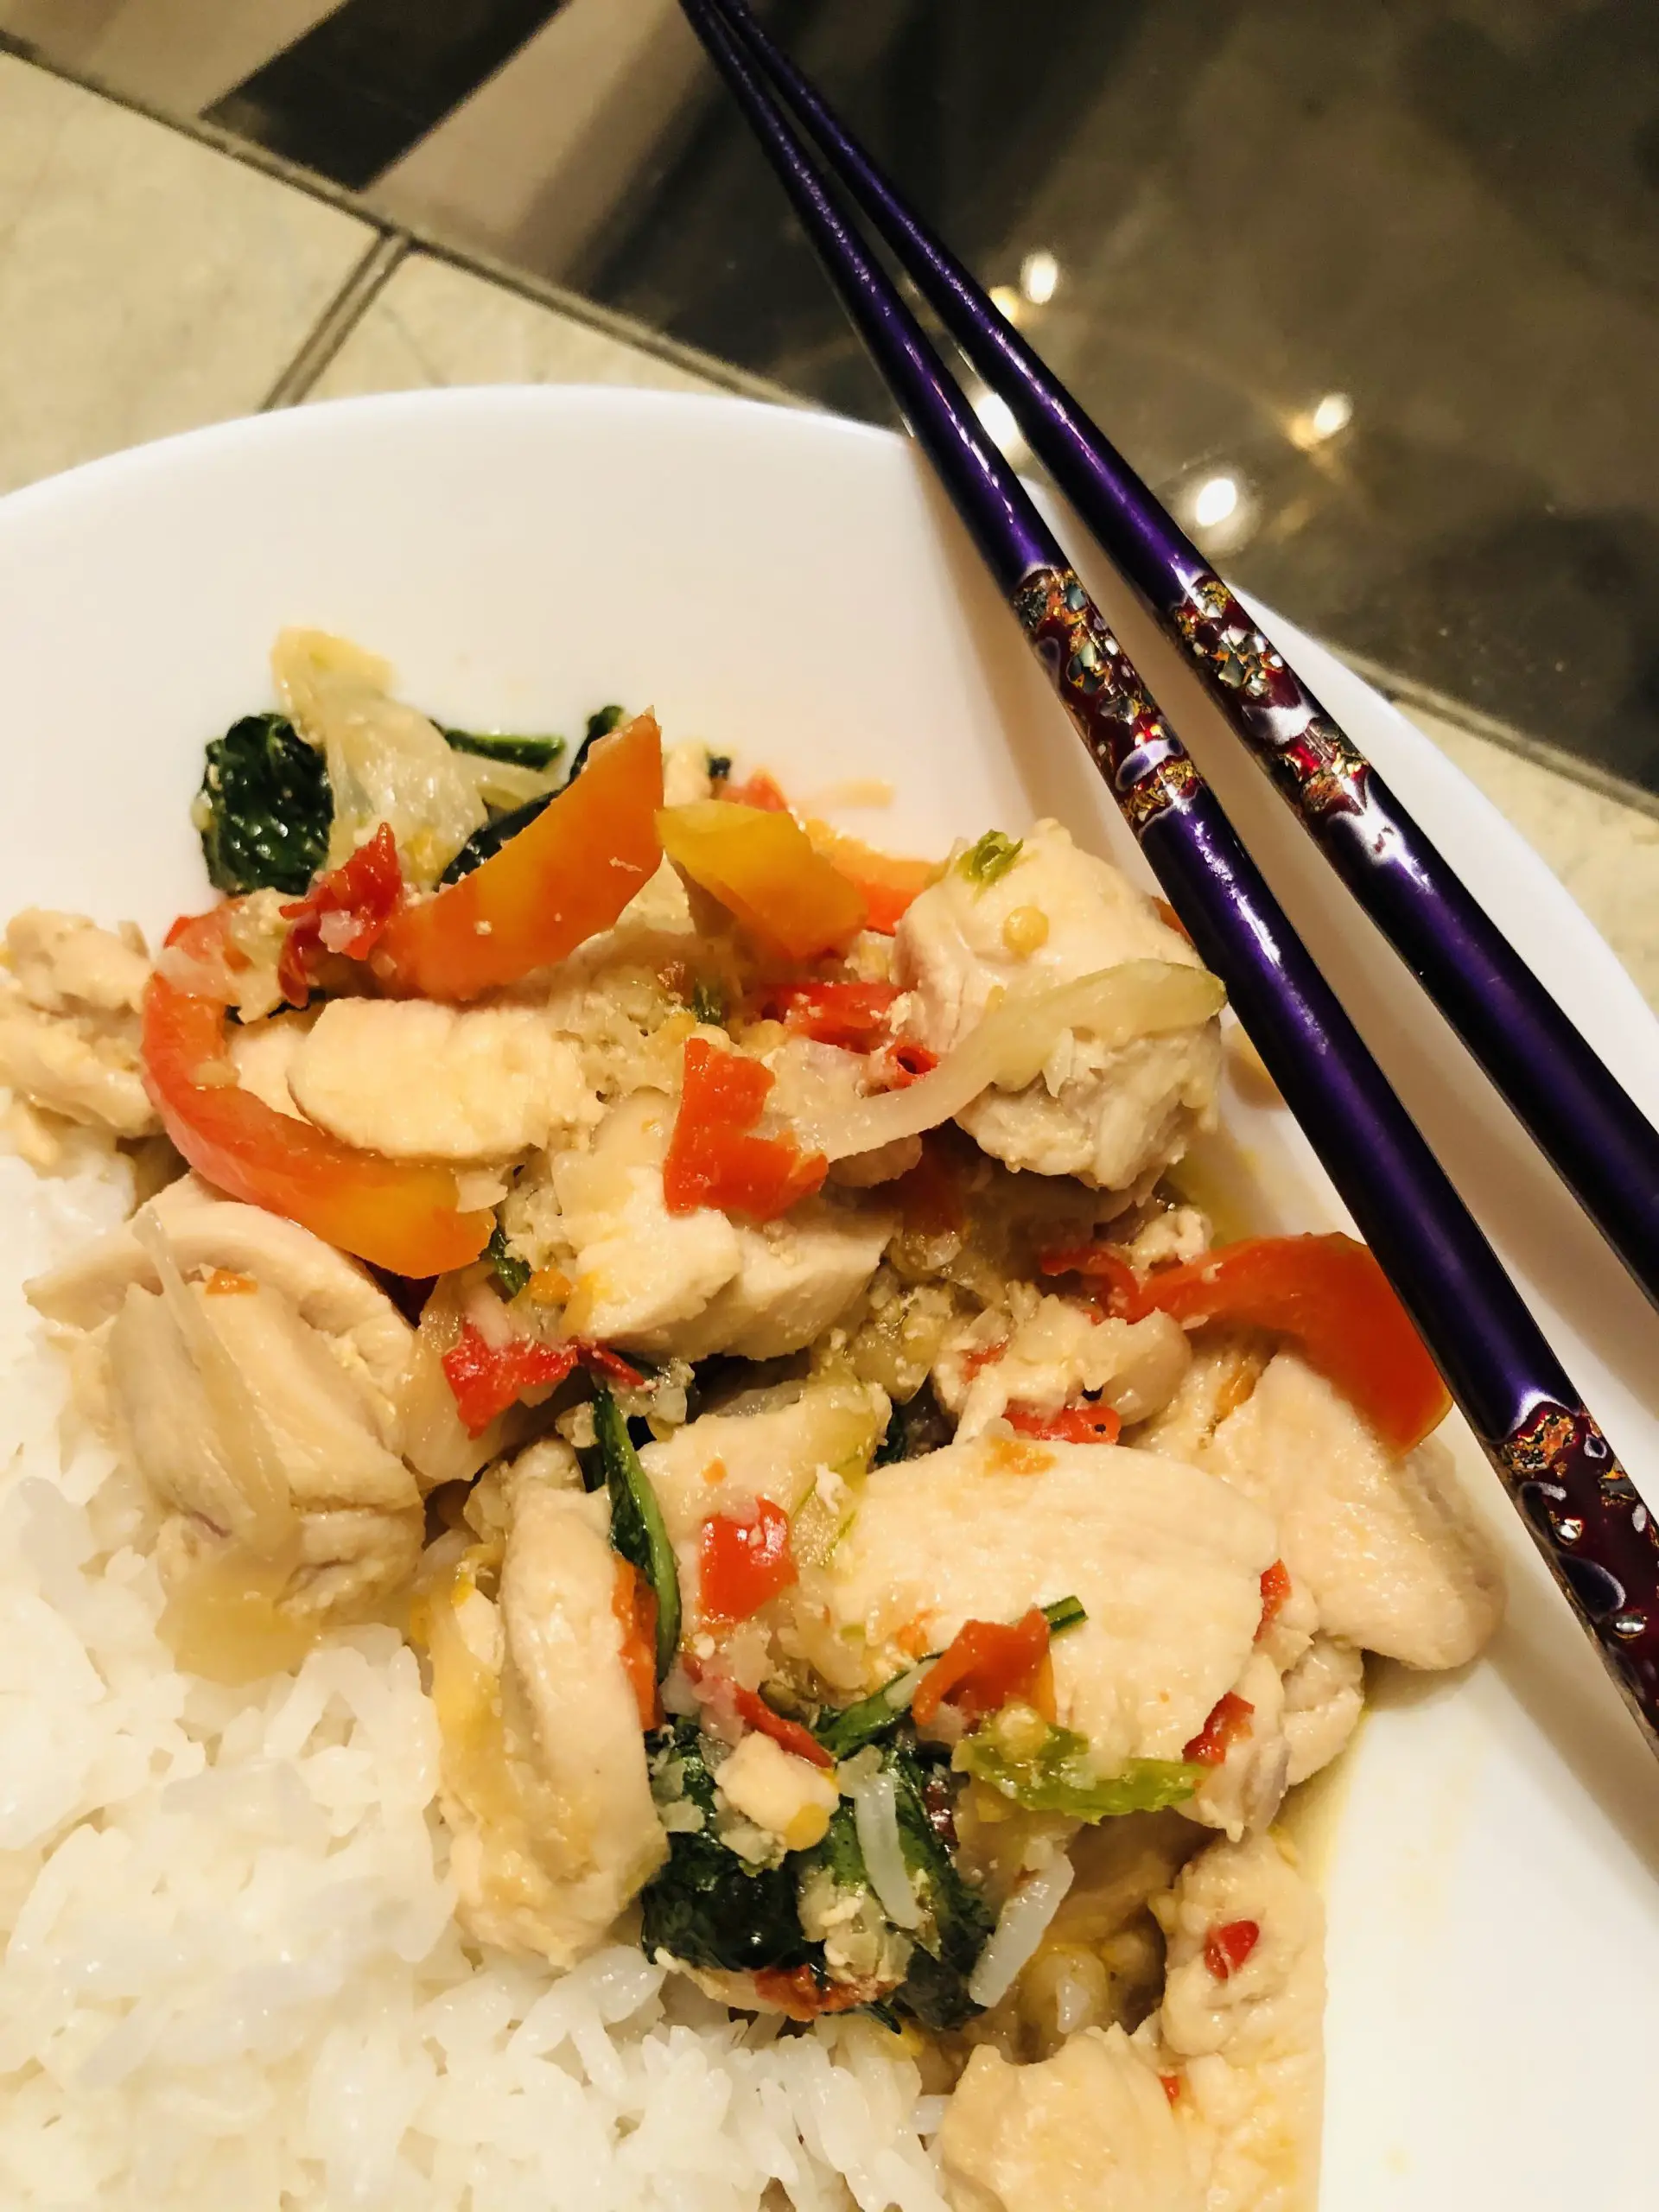 Chicken With Thai Basil served with rice in a white bowl with a pair of purple chopsticks on the side